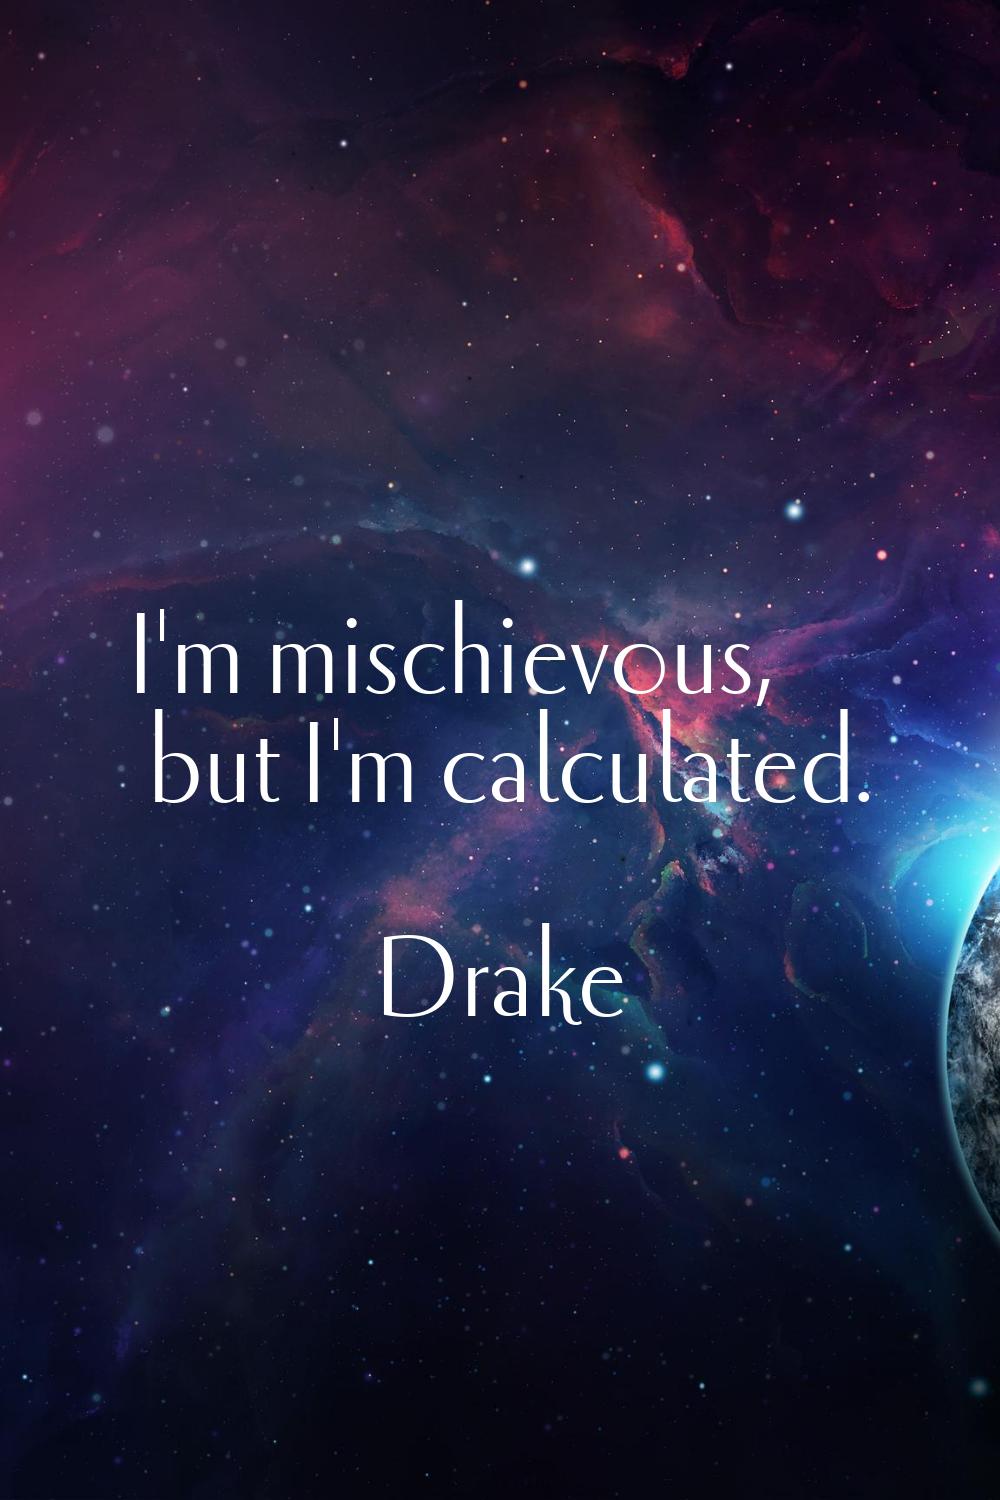 I'm mischievous, but I'm calculated.